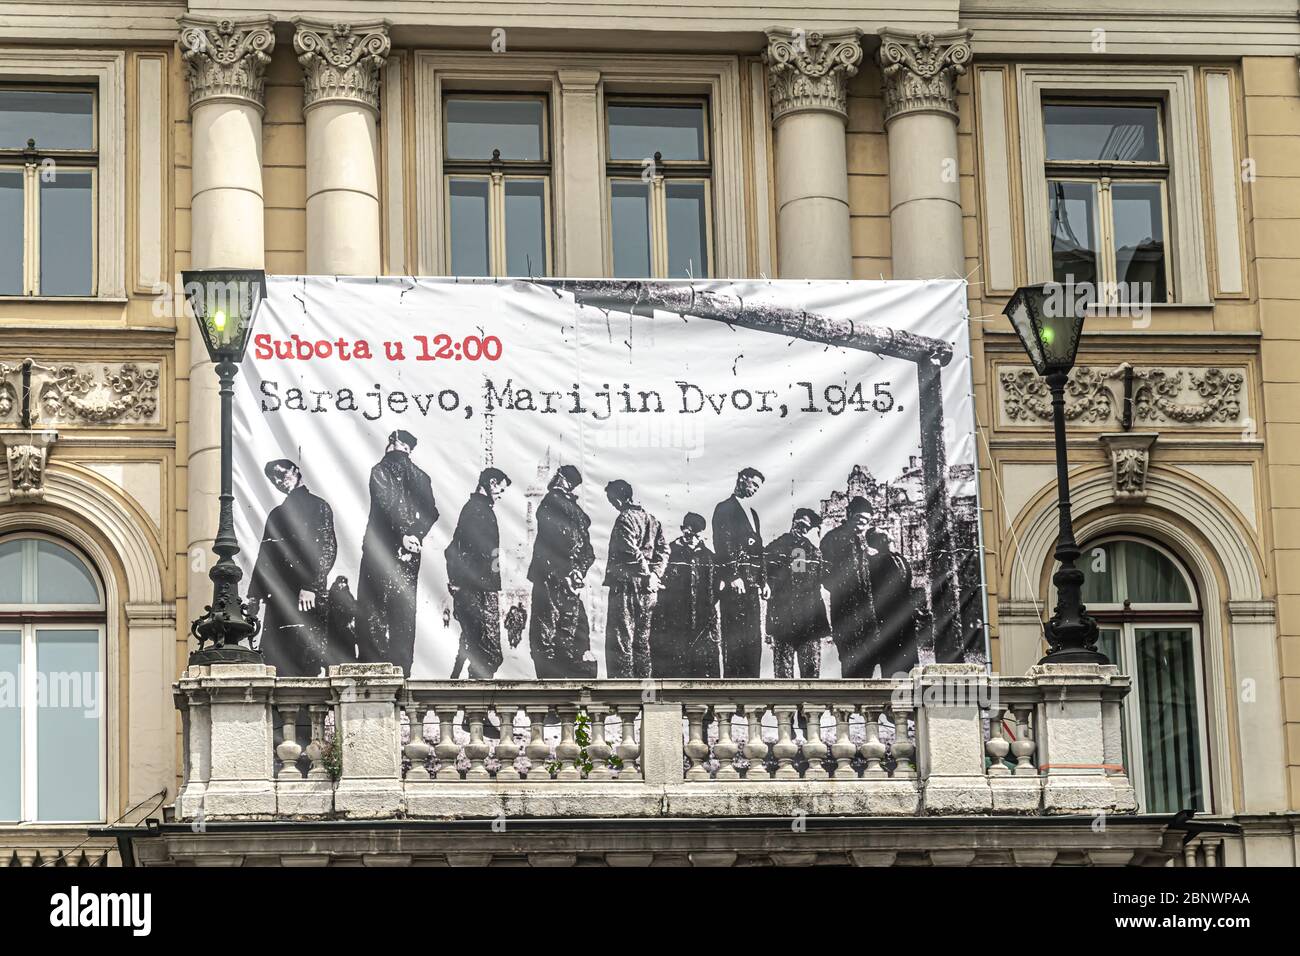 Anti-fascist protest in Sarajevo. A banner reminiscent of the NDH (The Independent State of Croatia) cruelty  in Sarajevo during 1945 Stock Photo